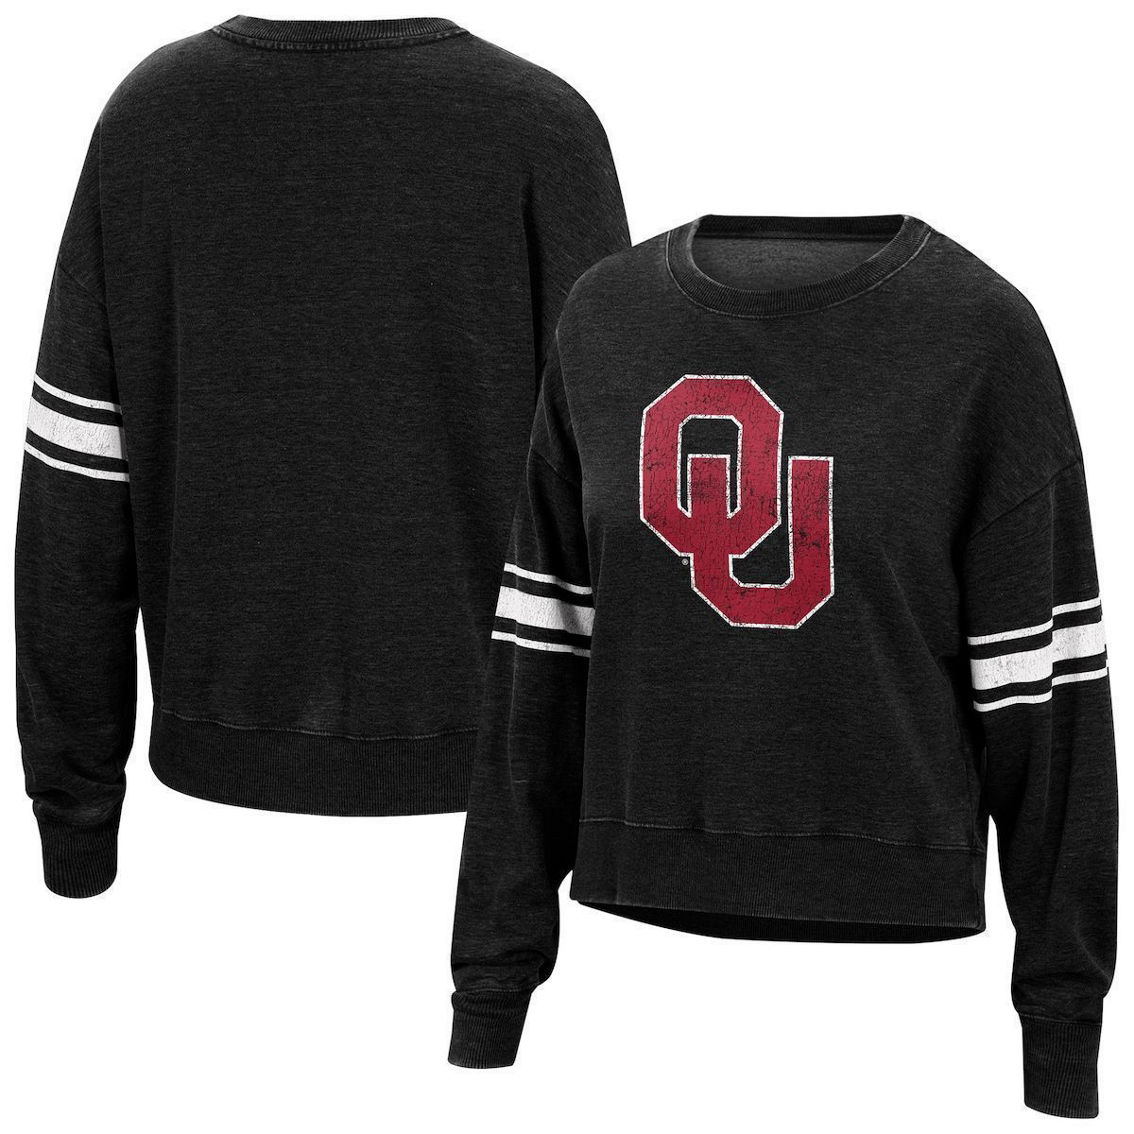 Top of the World Women's Black Oklahoma Sooners Camden Sleeve Stripe Washed Pullover Sweatshirt - Image 2 of 4